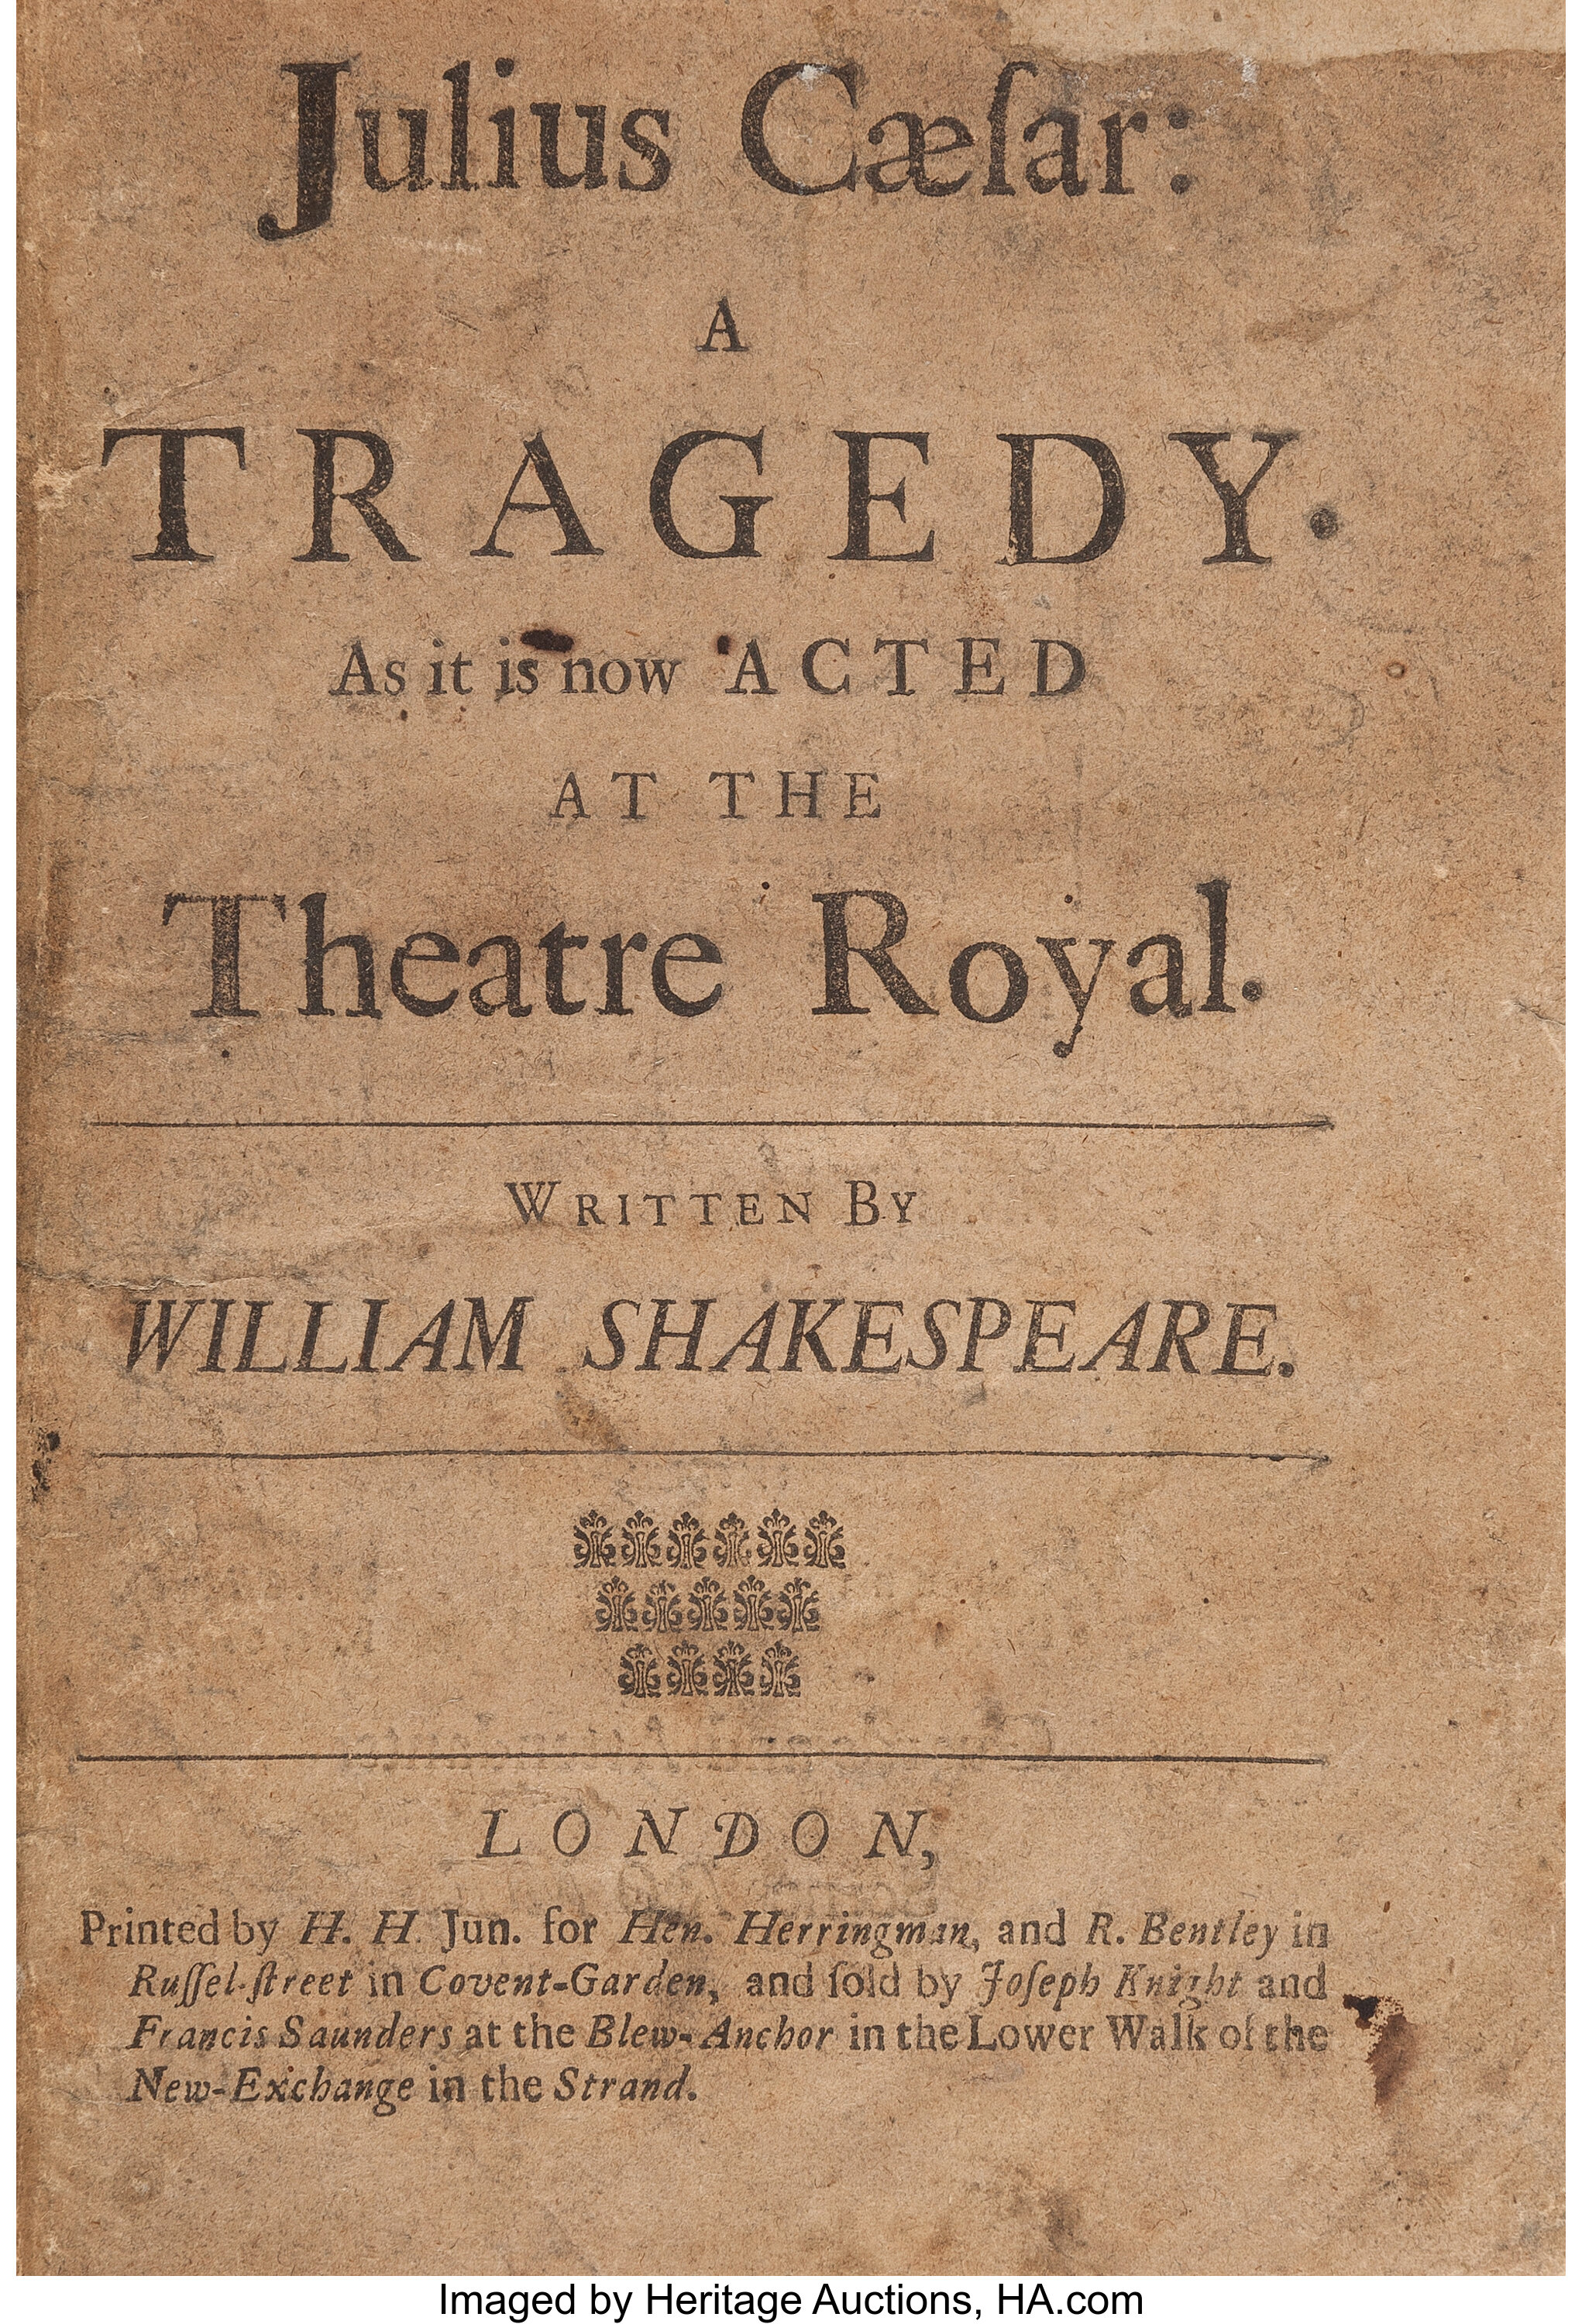 William Shakespeare. Julius Caesar: A Tragedy. As It Is Now Acted | Lot #45458 | Heritage Auctions